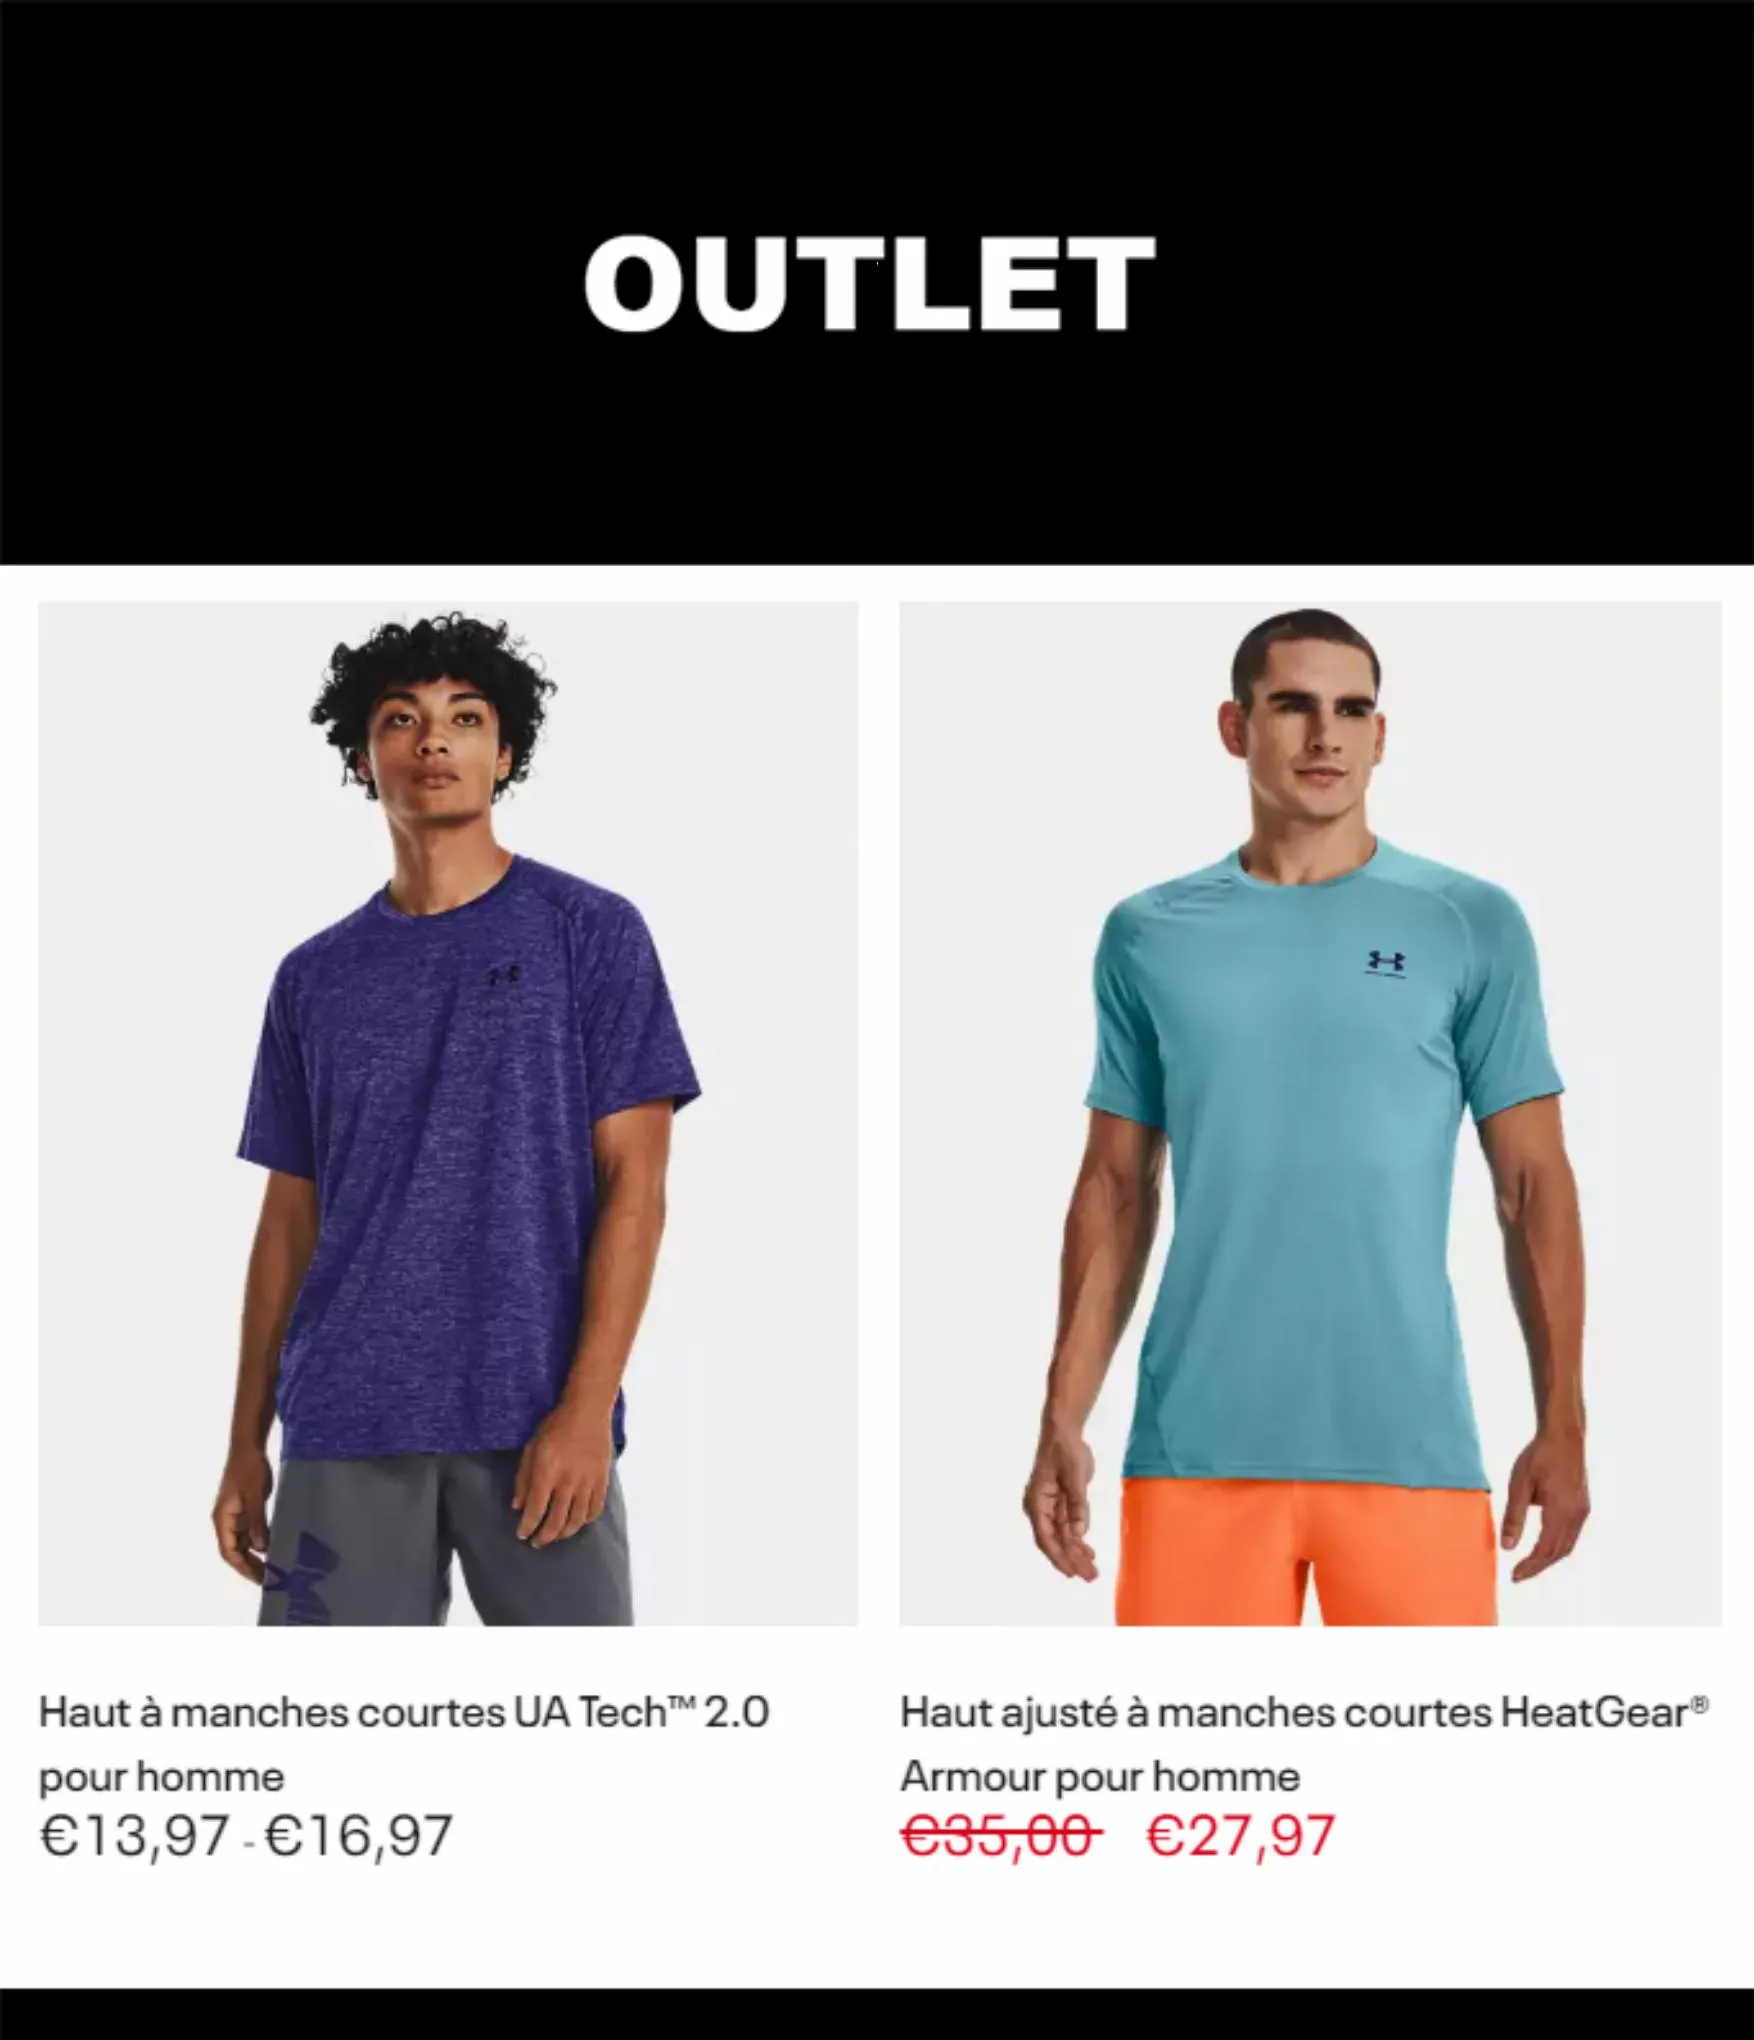 Catalogue Outlet Under Armour, page 00005